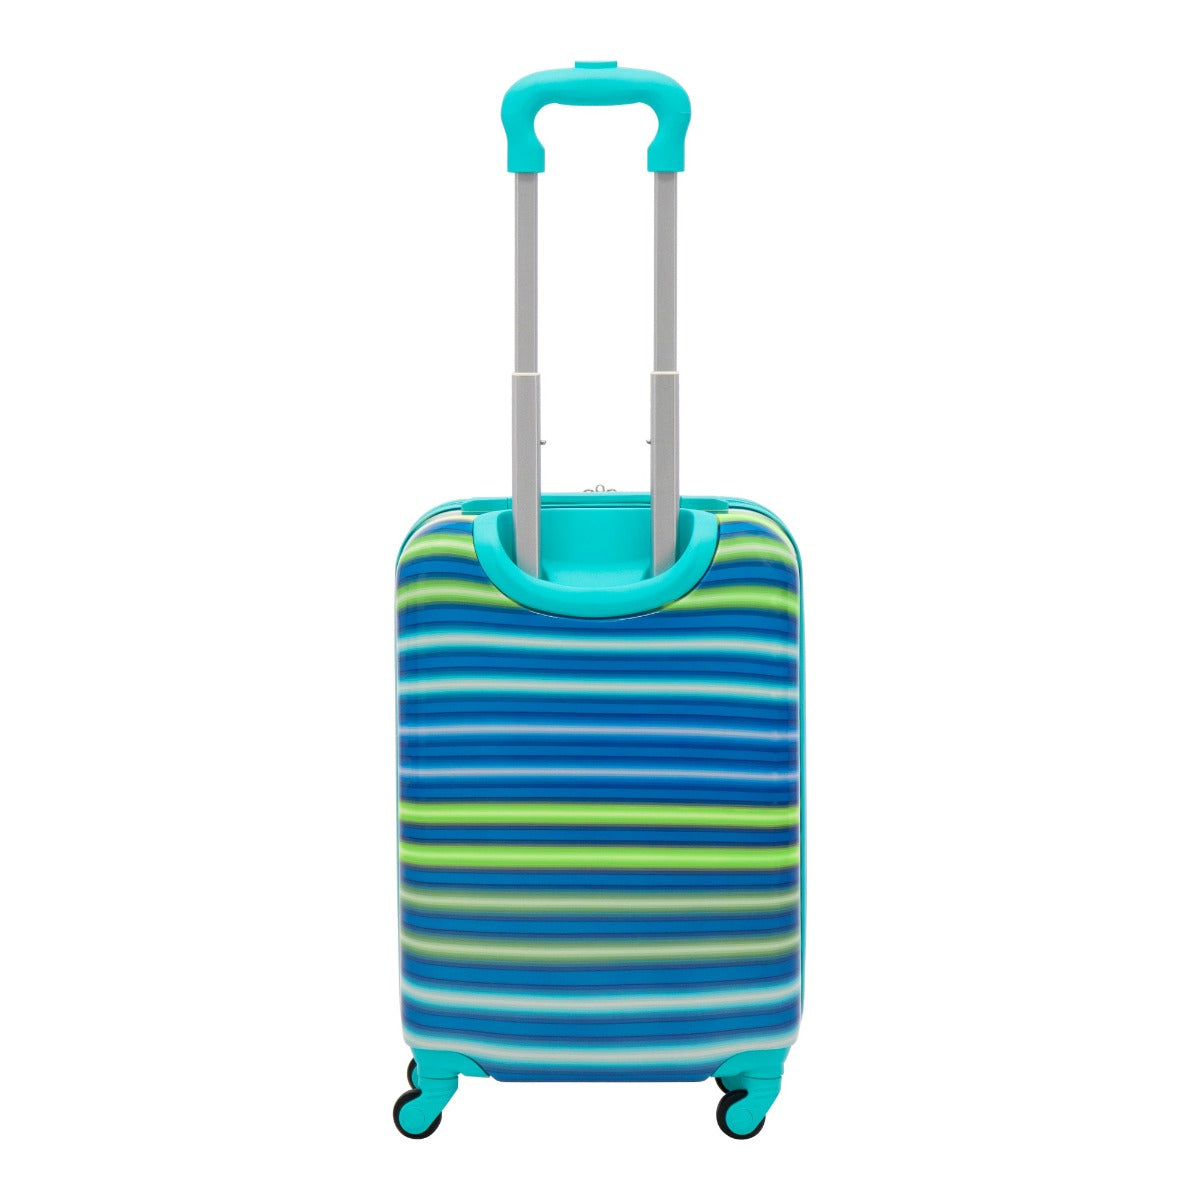 Disney Ful Stitch Neon Stripe Hardside Spinner Suitcase - Blue 21 inch Carry On Luggage for Kids